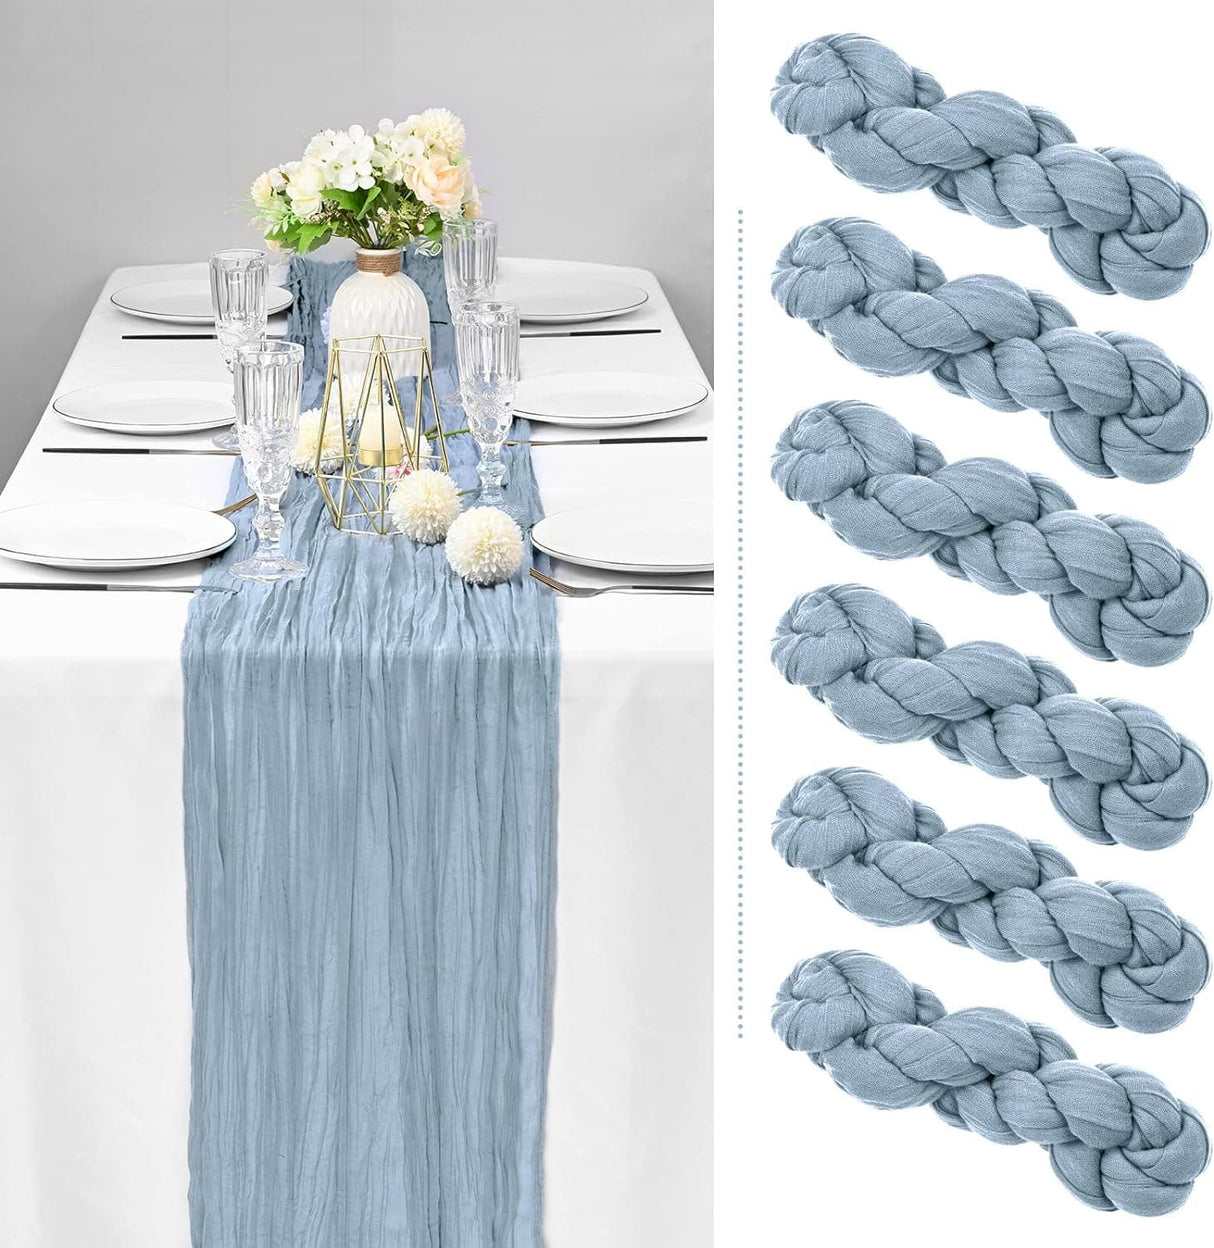 10 Pack/6 Pack Cheesecloth Table Runner Gauze Table Runner 10FT 13FT Long Semi-Sheer Table Runner Boho or Rustic Wedding Table Decor for Wedding Decor Arch Draping Bridal Shower Holiday Party